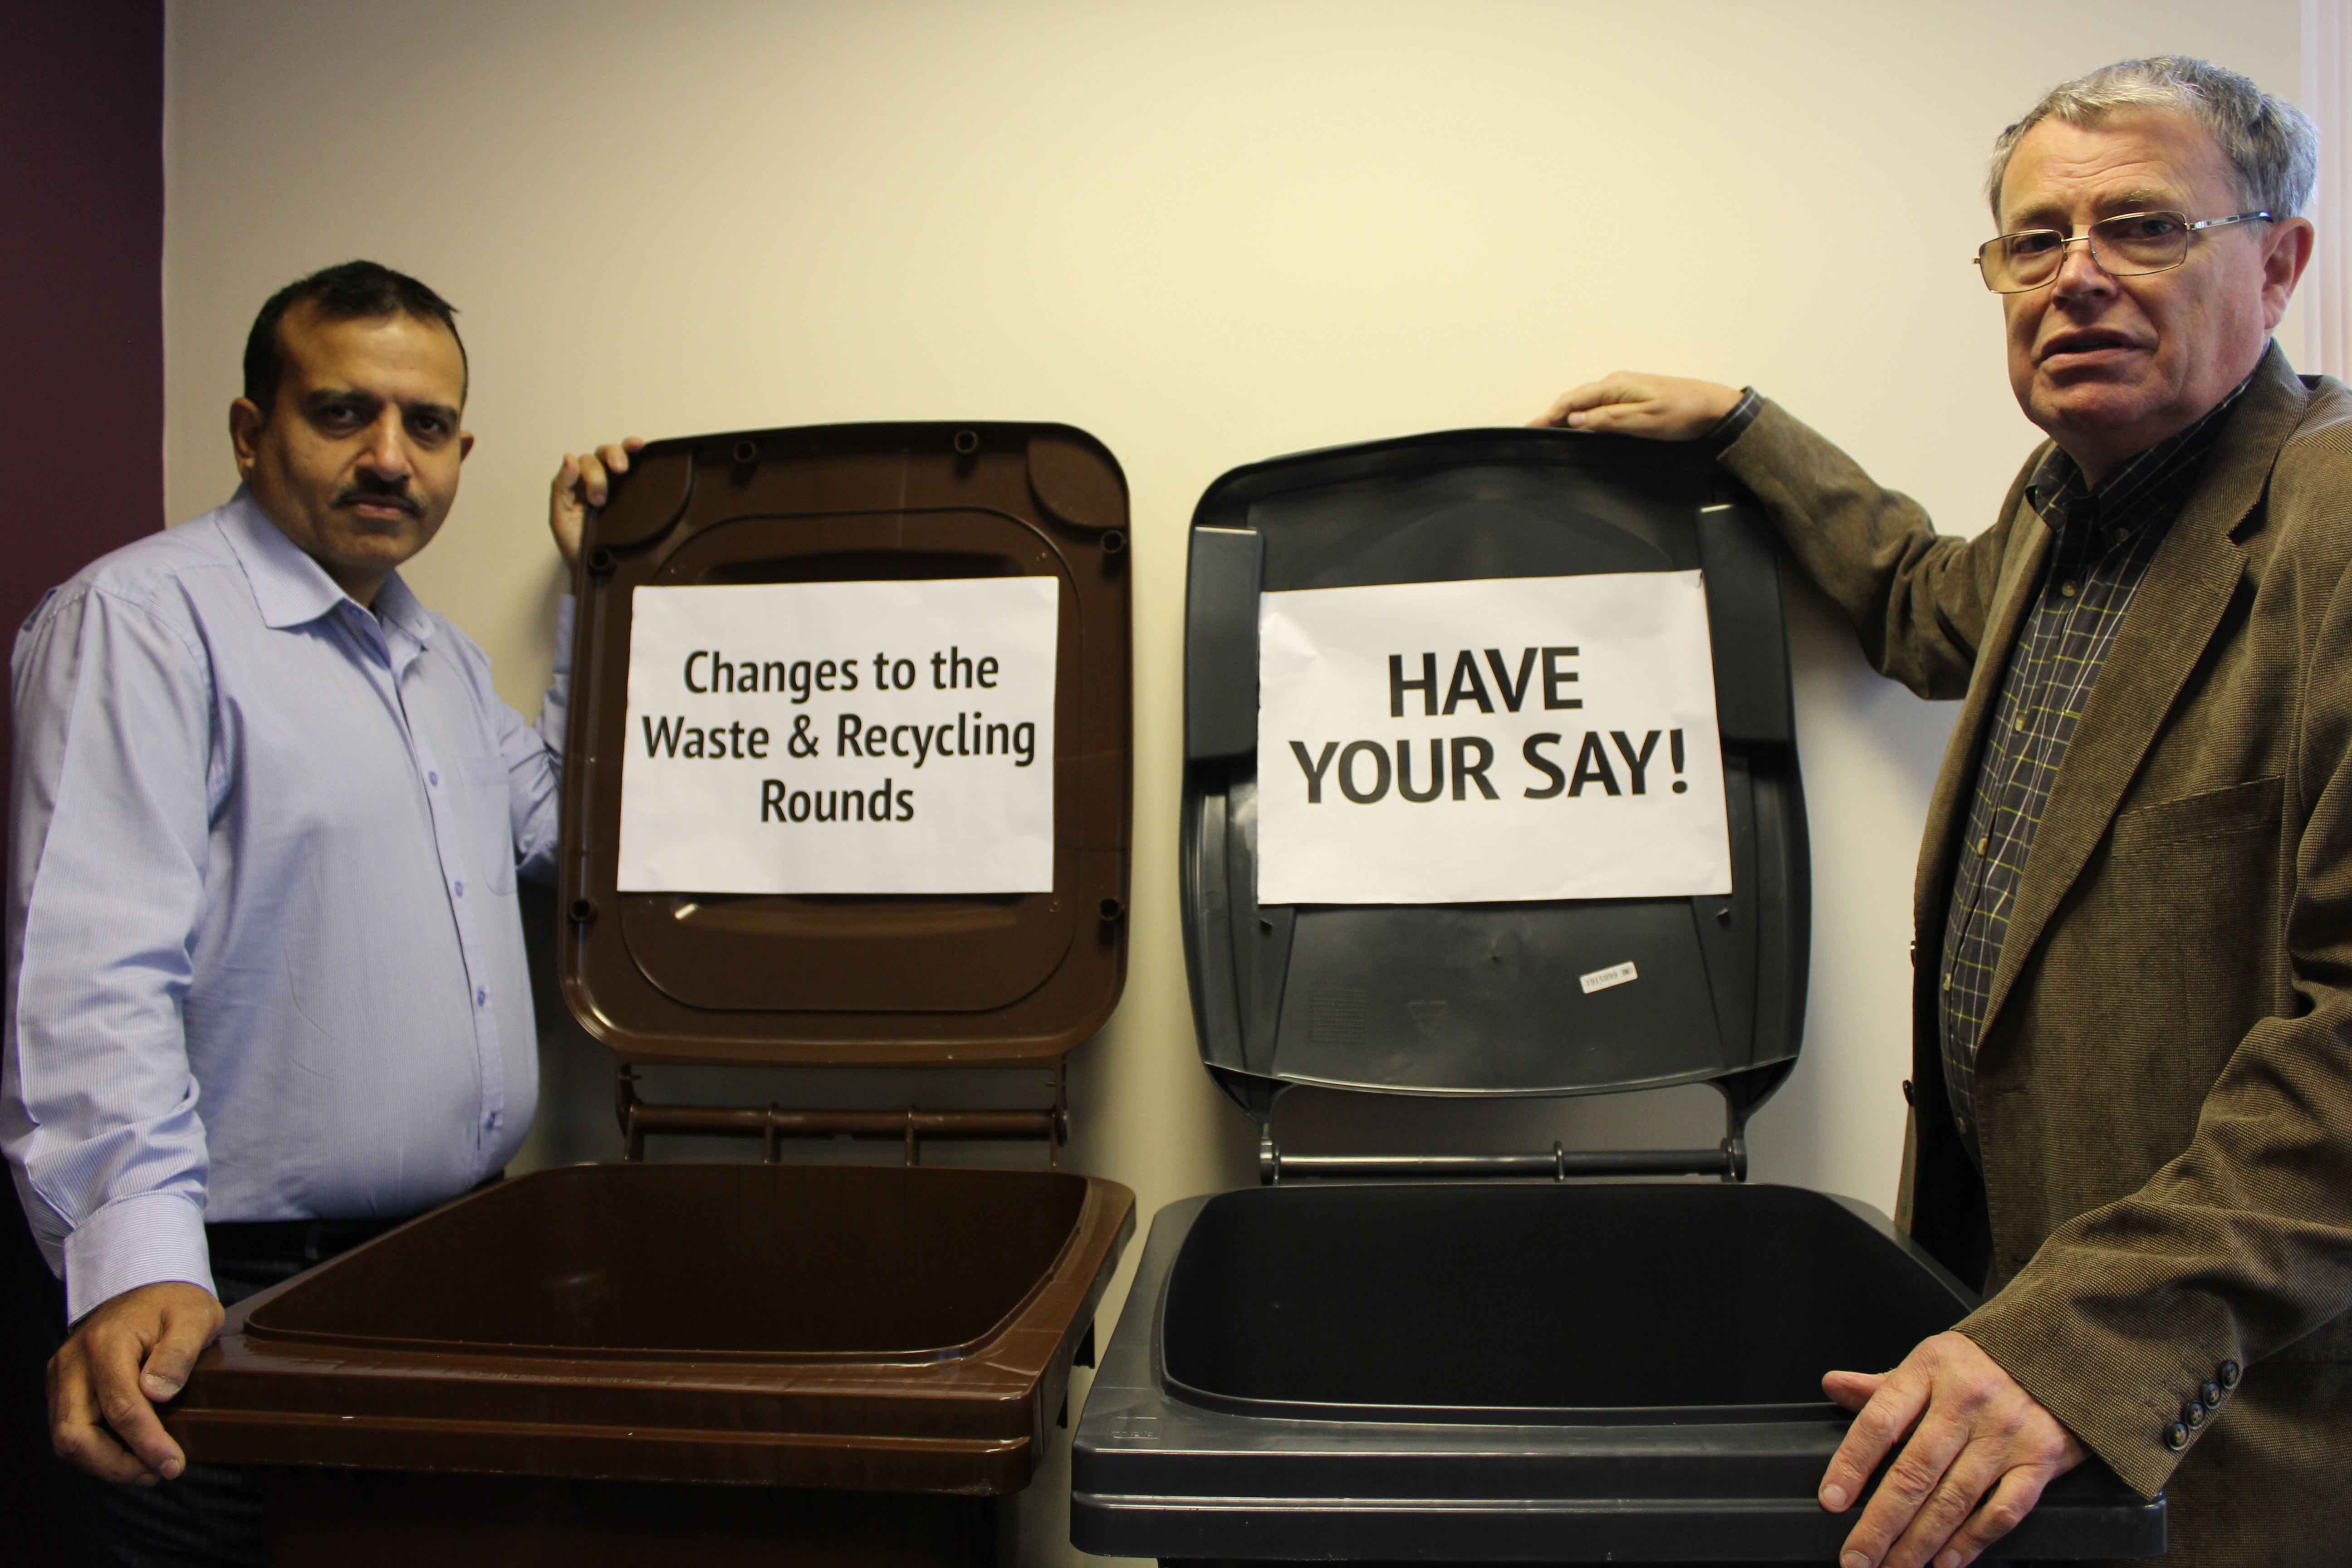 News story on proposals to save money on refuse/recycling rounds.